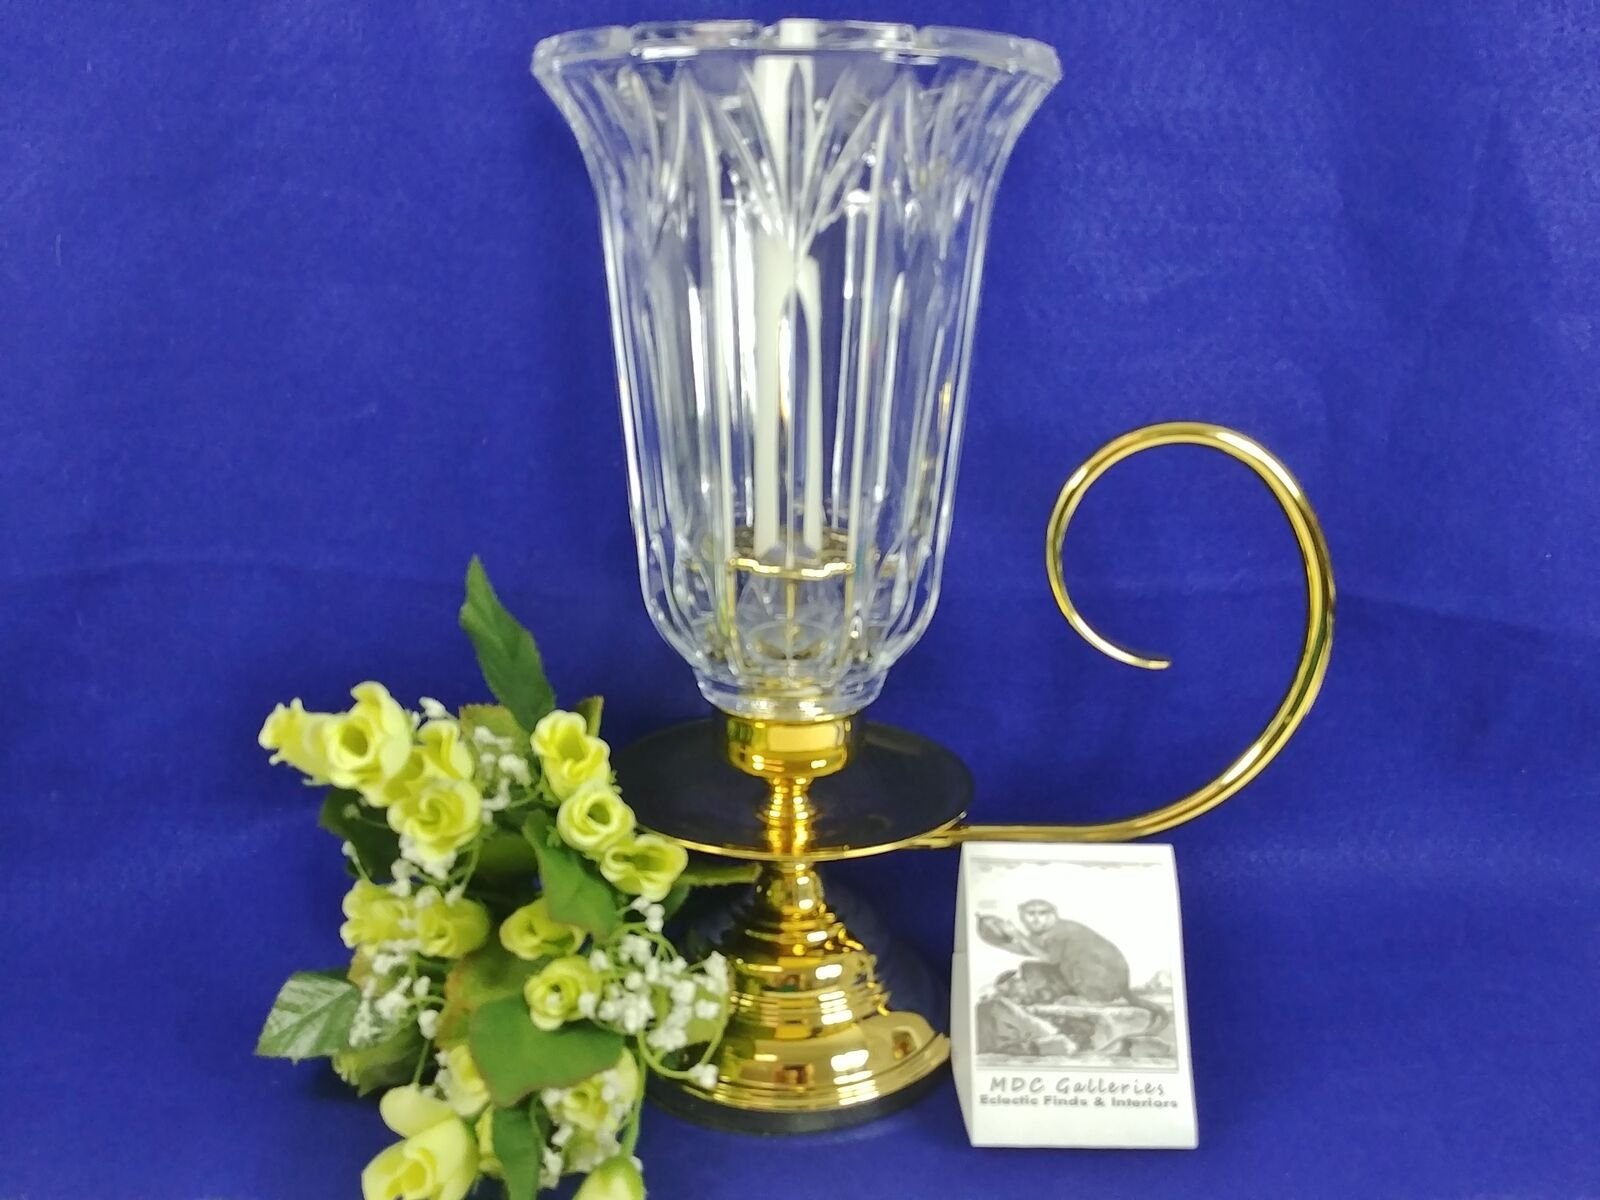 Hurricane Lamp Taper Candle Holder w/ Handle Glass Wind Shade Heavy Pc.